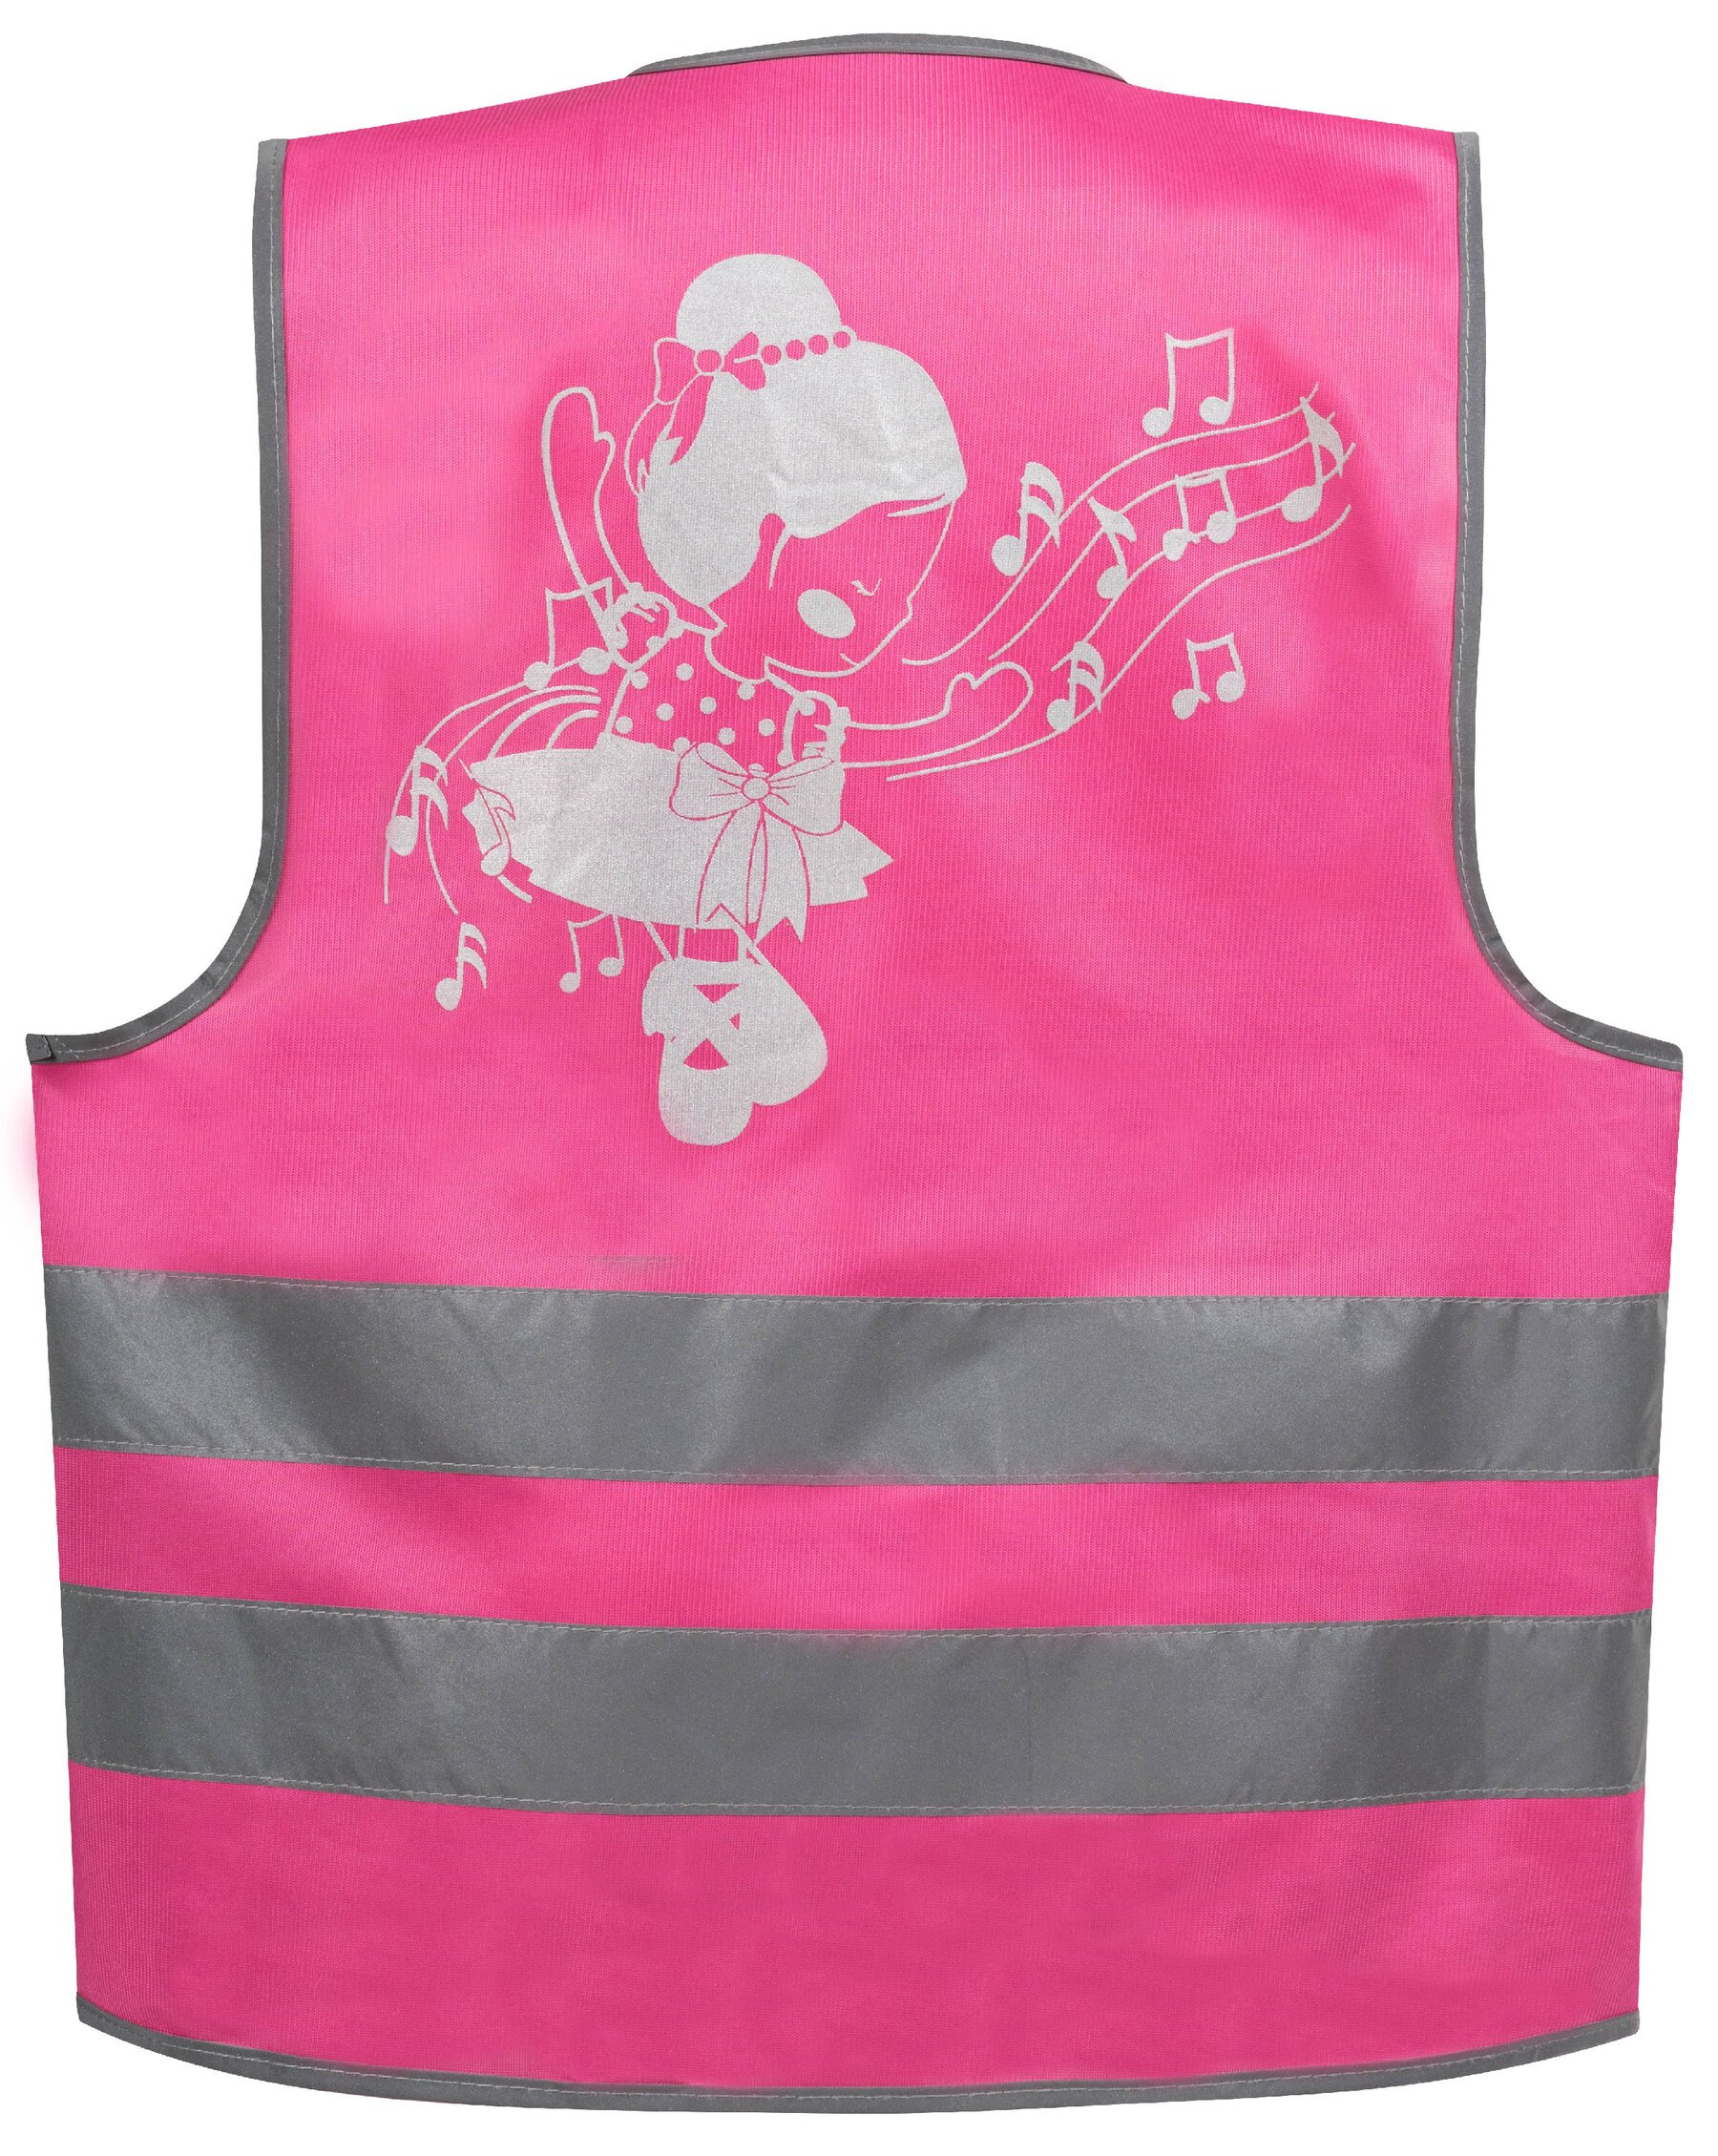 safety vest 3-6 years Ballet Doll